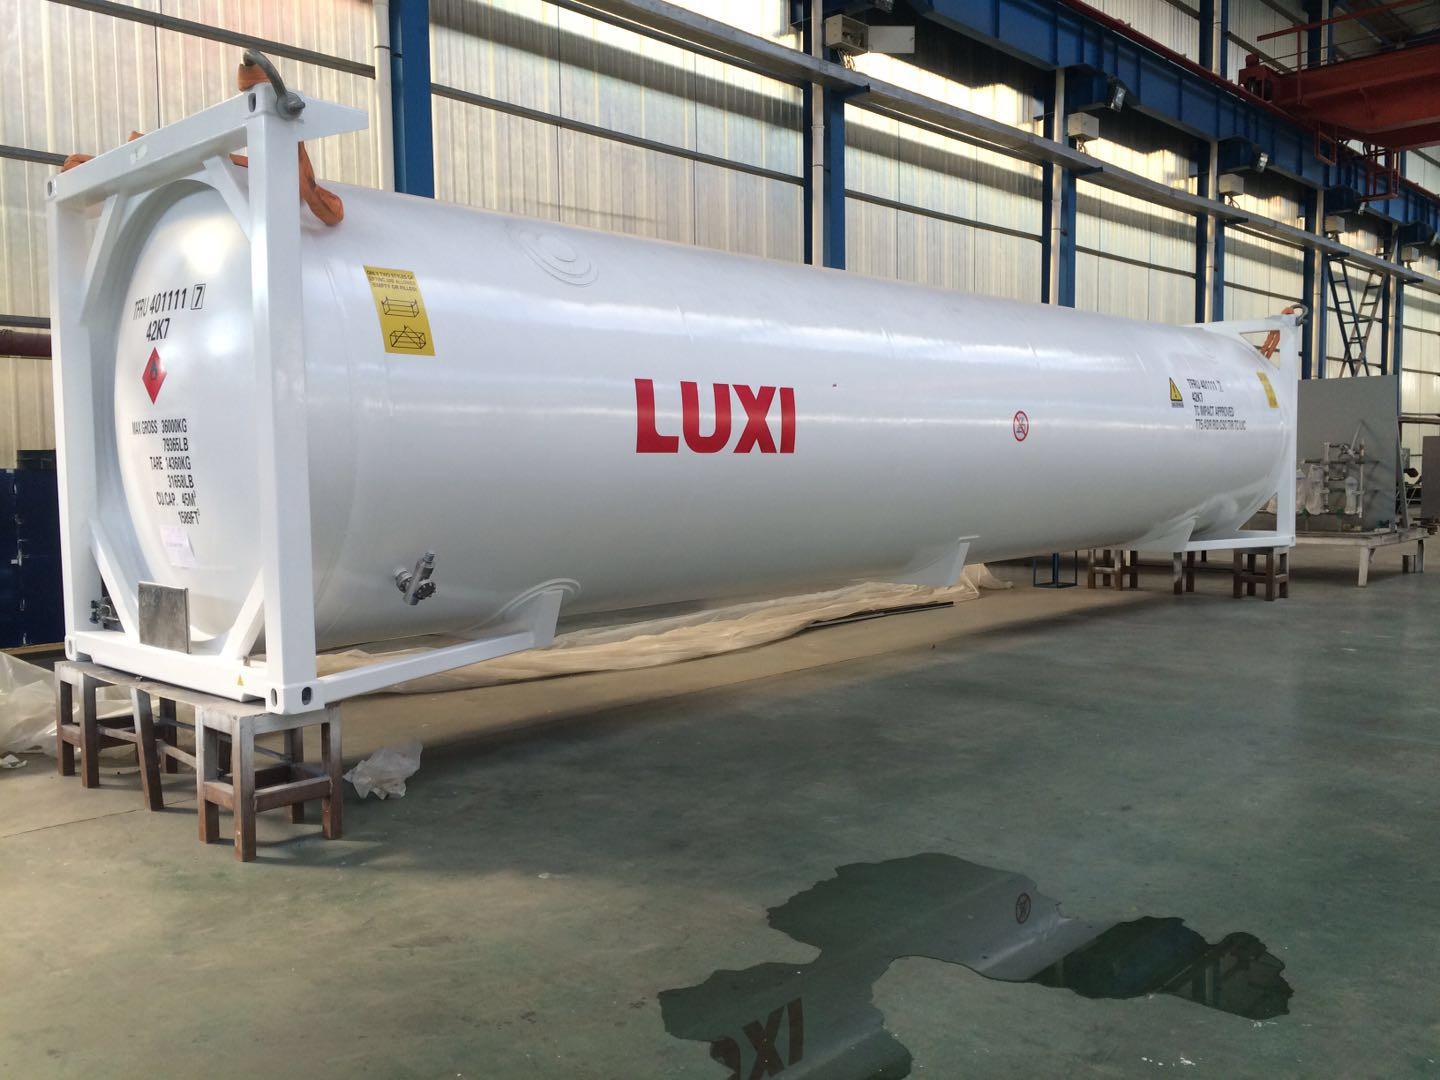 Comprar ADR Certified LNG 20FT ISO Container, ADR Certified LNG 20FT ISO Container Precios, ADR Certified LNG 20FT ISO Container Marcas, ADR Certified LNG 20FT ISO Container Fabricante, ADR Certified LNG 20FT ISO Container Citas, ADR Certified LNG 20FT ISO Container Empresa.